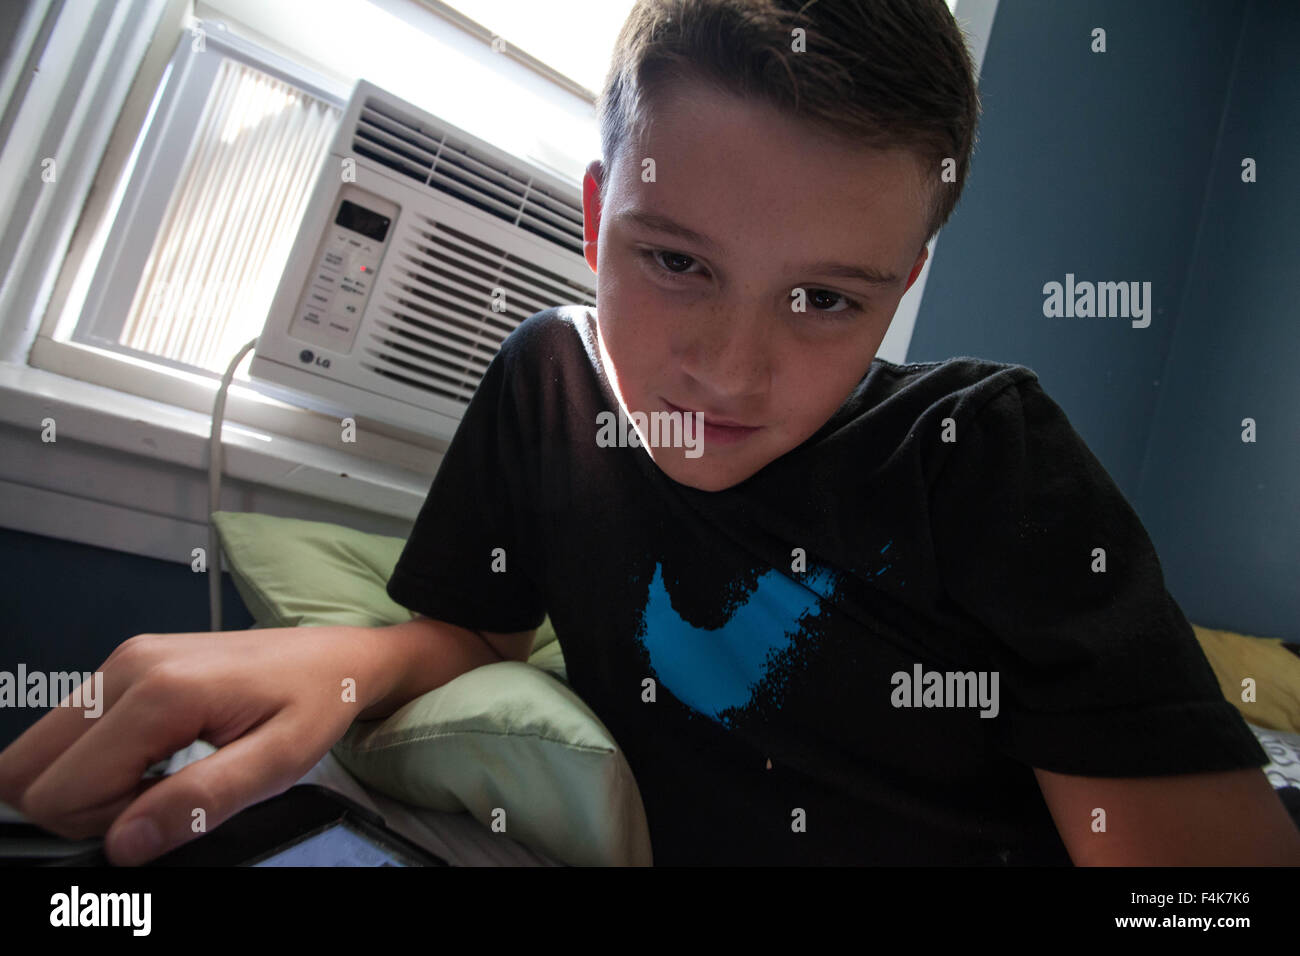 A young boy looks at his tablet alone in his bedroom on a sunny day Stock Photo